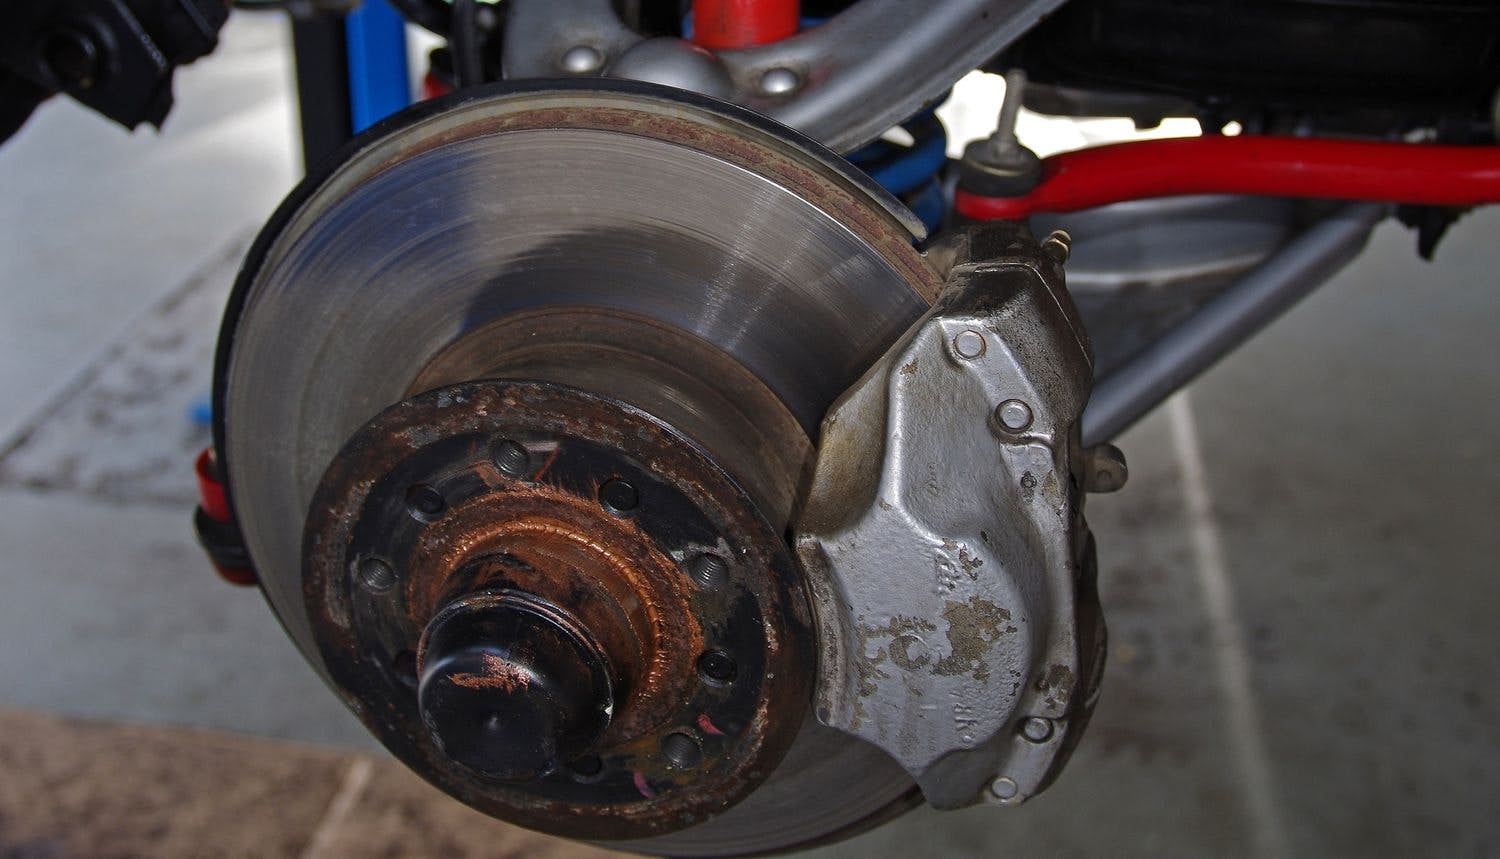 Disc brakes: What are their pros and cons?